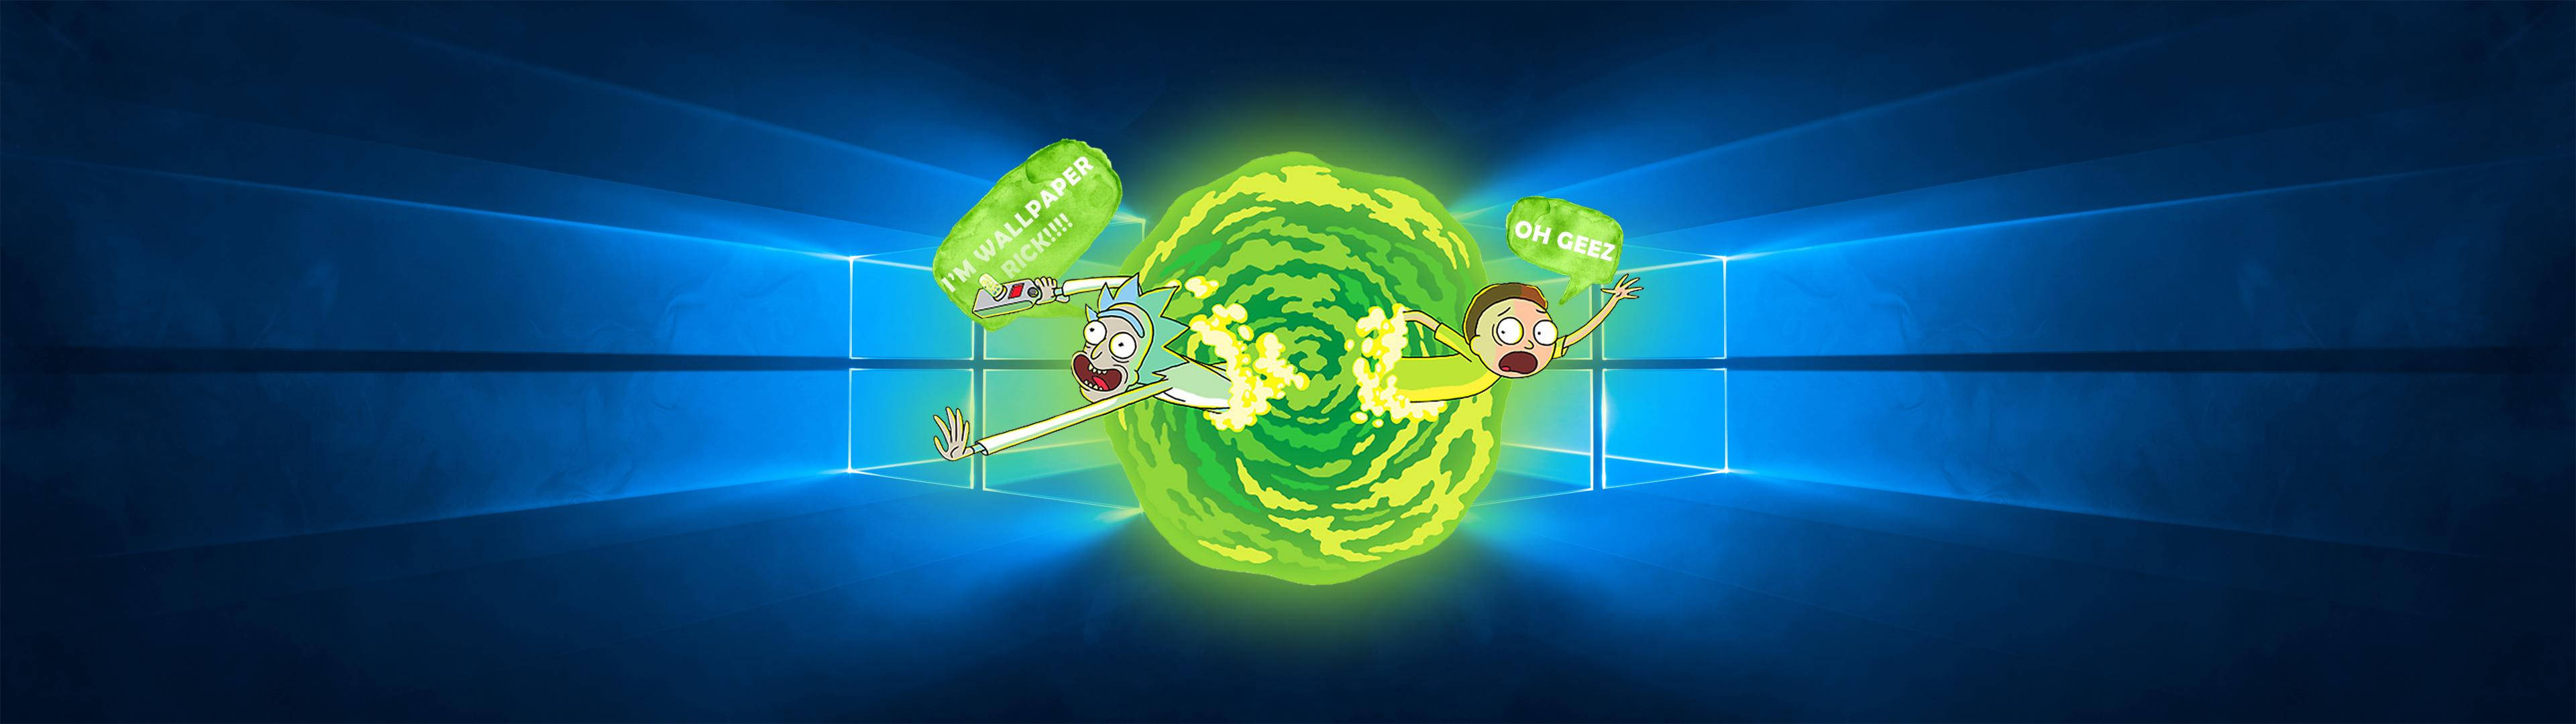 Ultrawide Rick And Morty Background